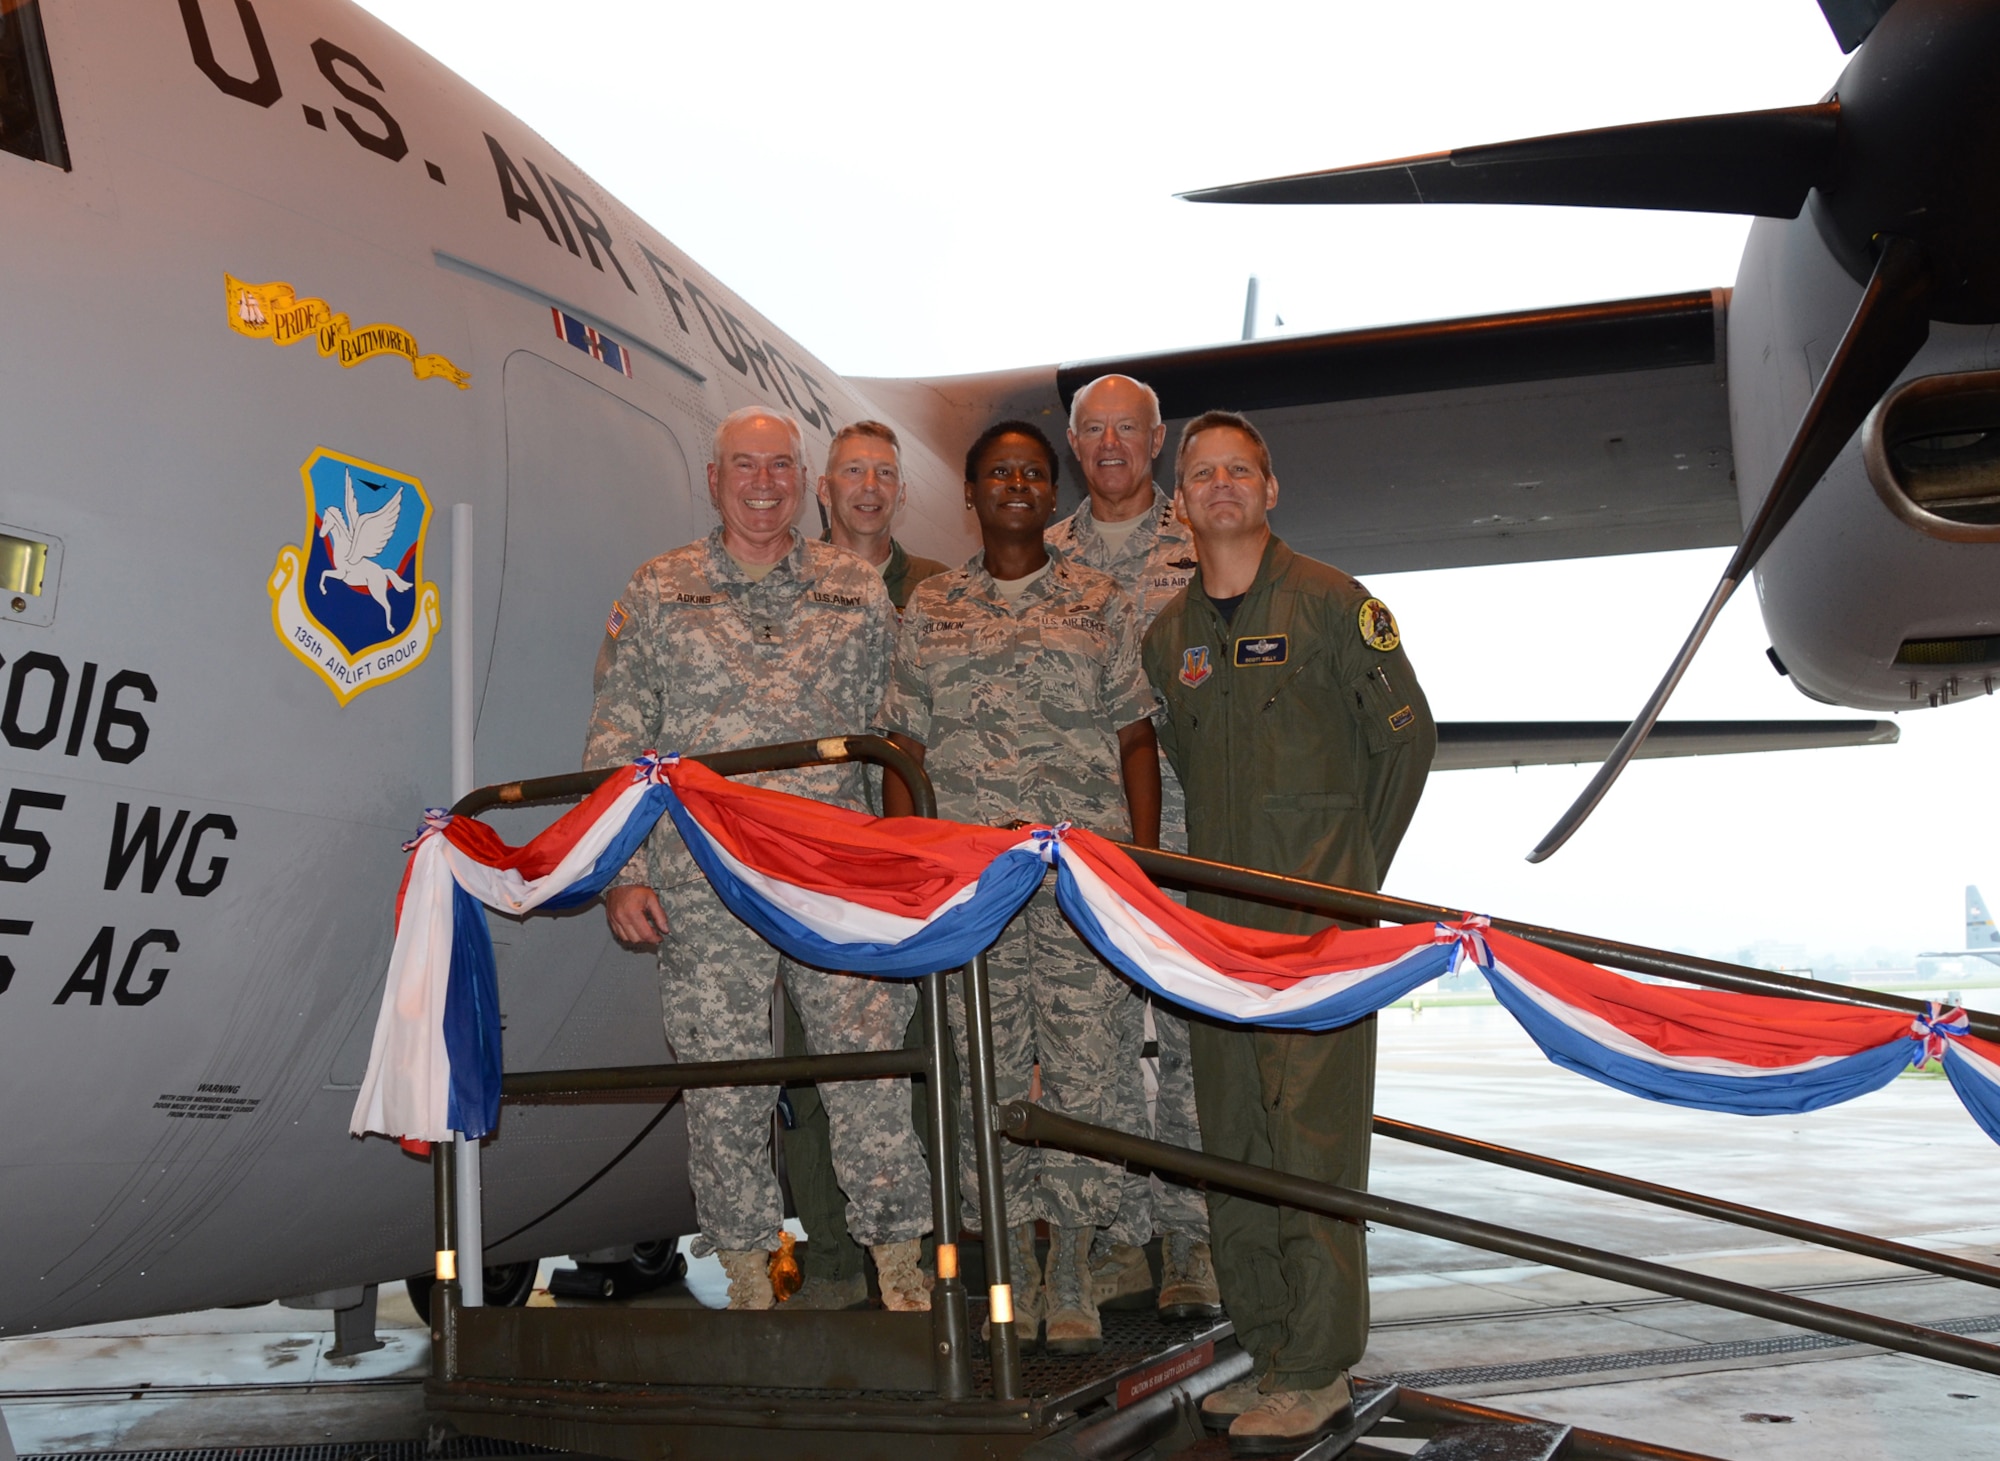 Maj. Gen. James A. Adkins, Adjutant General, Col. Thomas E. Hans, Commander 135th Airlift Group, Brig. Gen. Allyson R. Solomon, the Assistant Adjutant General for Air Maryland Air National Guard, Lt. Gen. Harry M. Wyatt III, Director, Air National Guard and Col. Scott L. Kelly, commander of the 175th Wing Maryland Air National Guard stand together after the christening of the C-27J Spartan.  On August 13, 2011, the 175th Wing held an arrival ceremony at Warfield Air National Guard Base.  The ceremony marked a transition from the C-130J Hercules to the C-27J Spartan.  (U.S. Air Force photo by Staff Sgt. Benjamin Hughes/RELEASED)